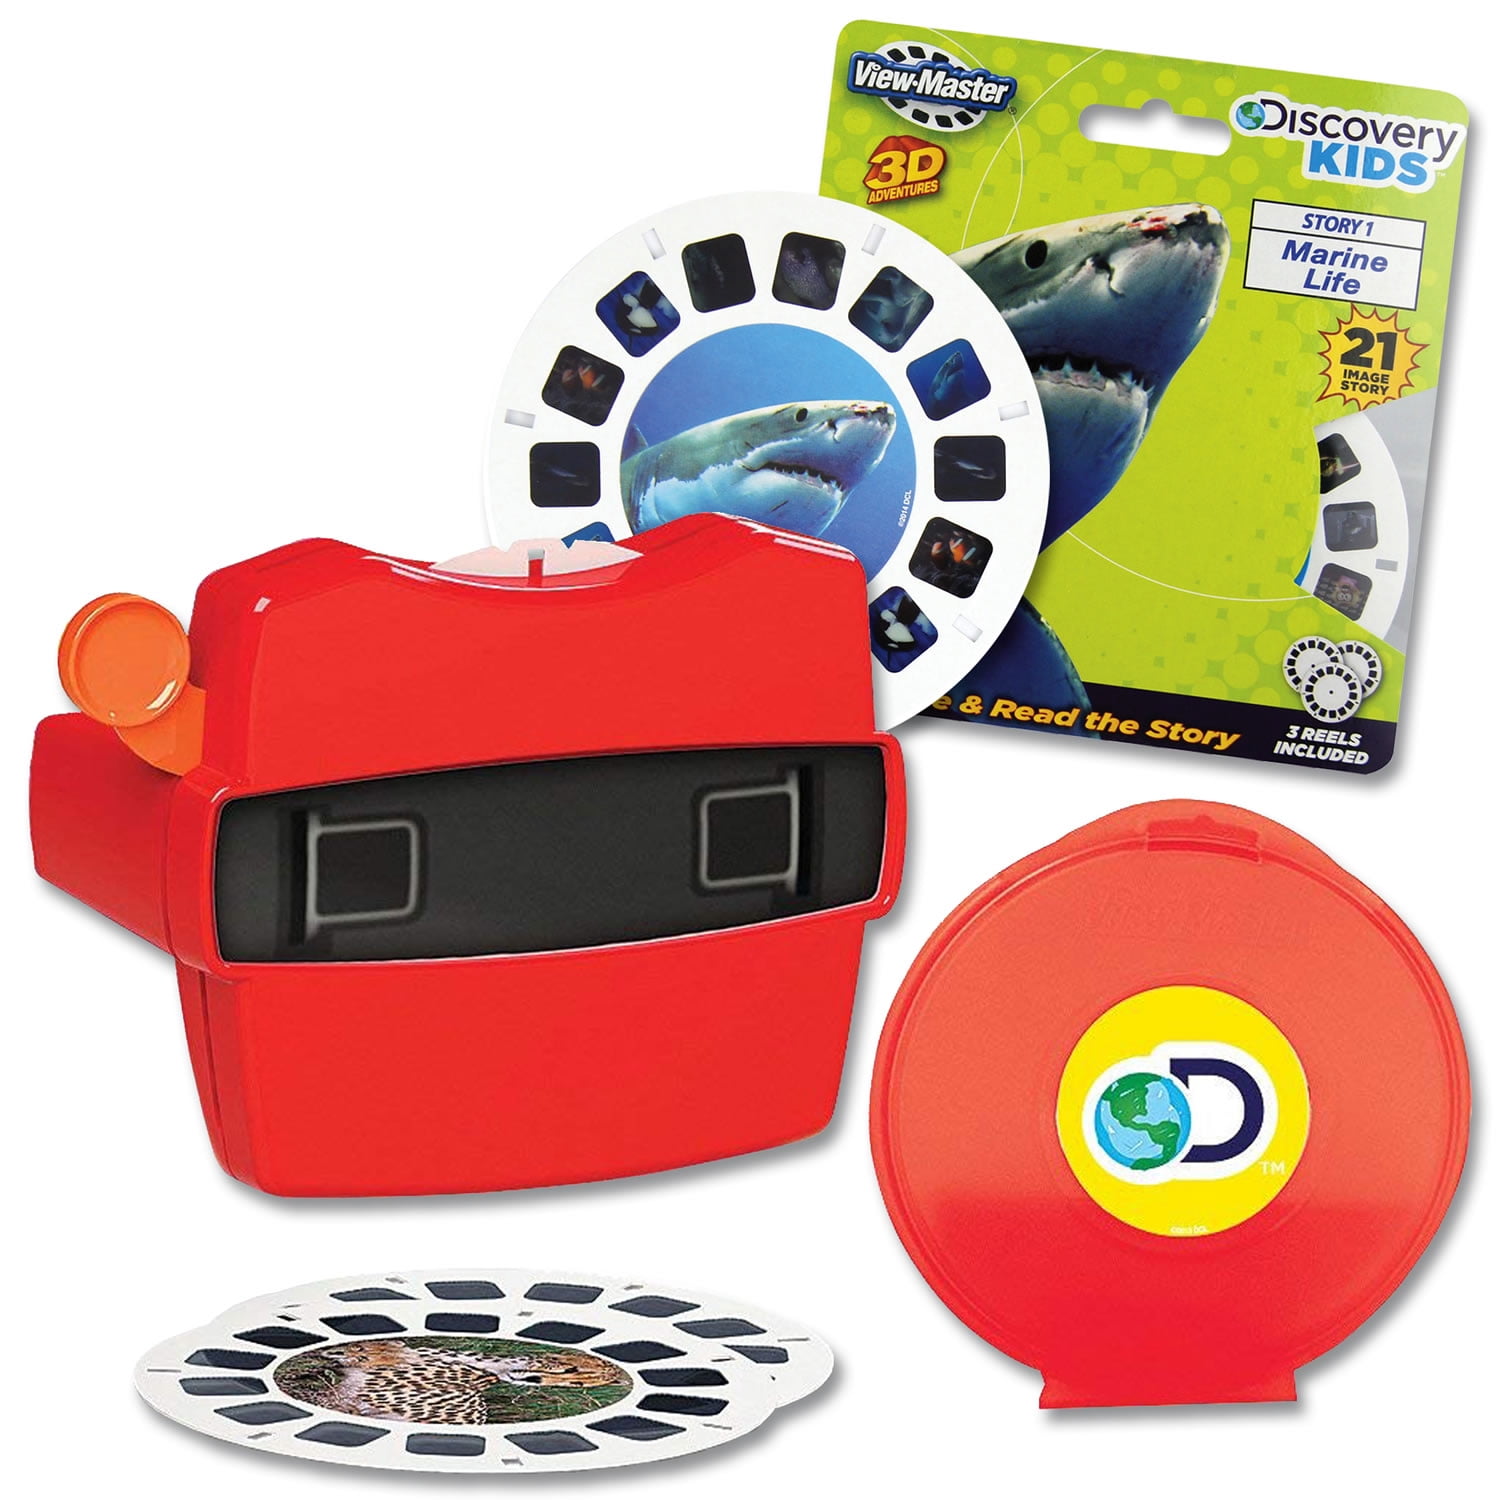 Viewfinders View-Master 3d Reels Toy Story 1 for sale online 